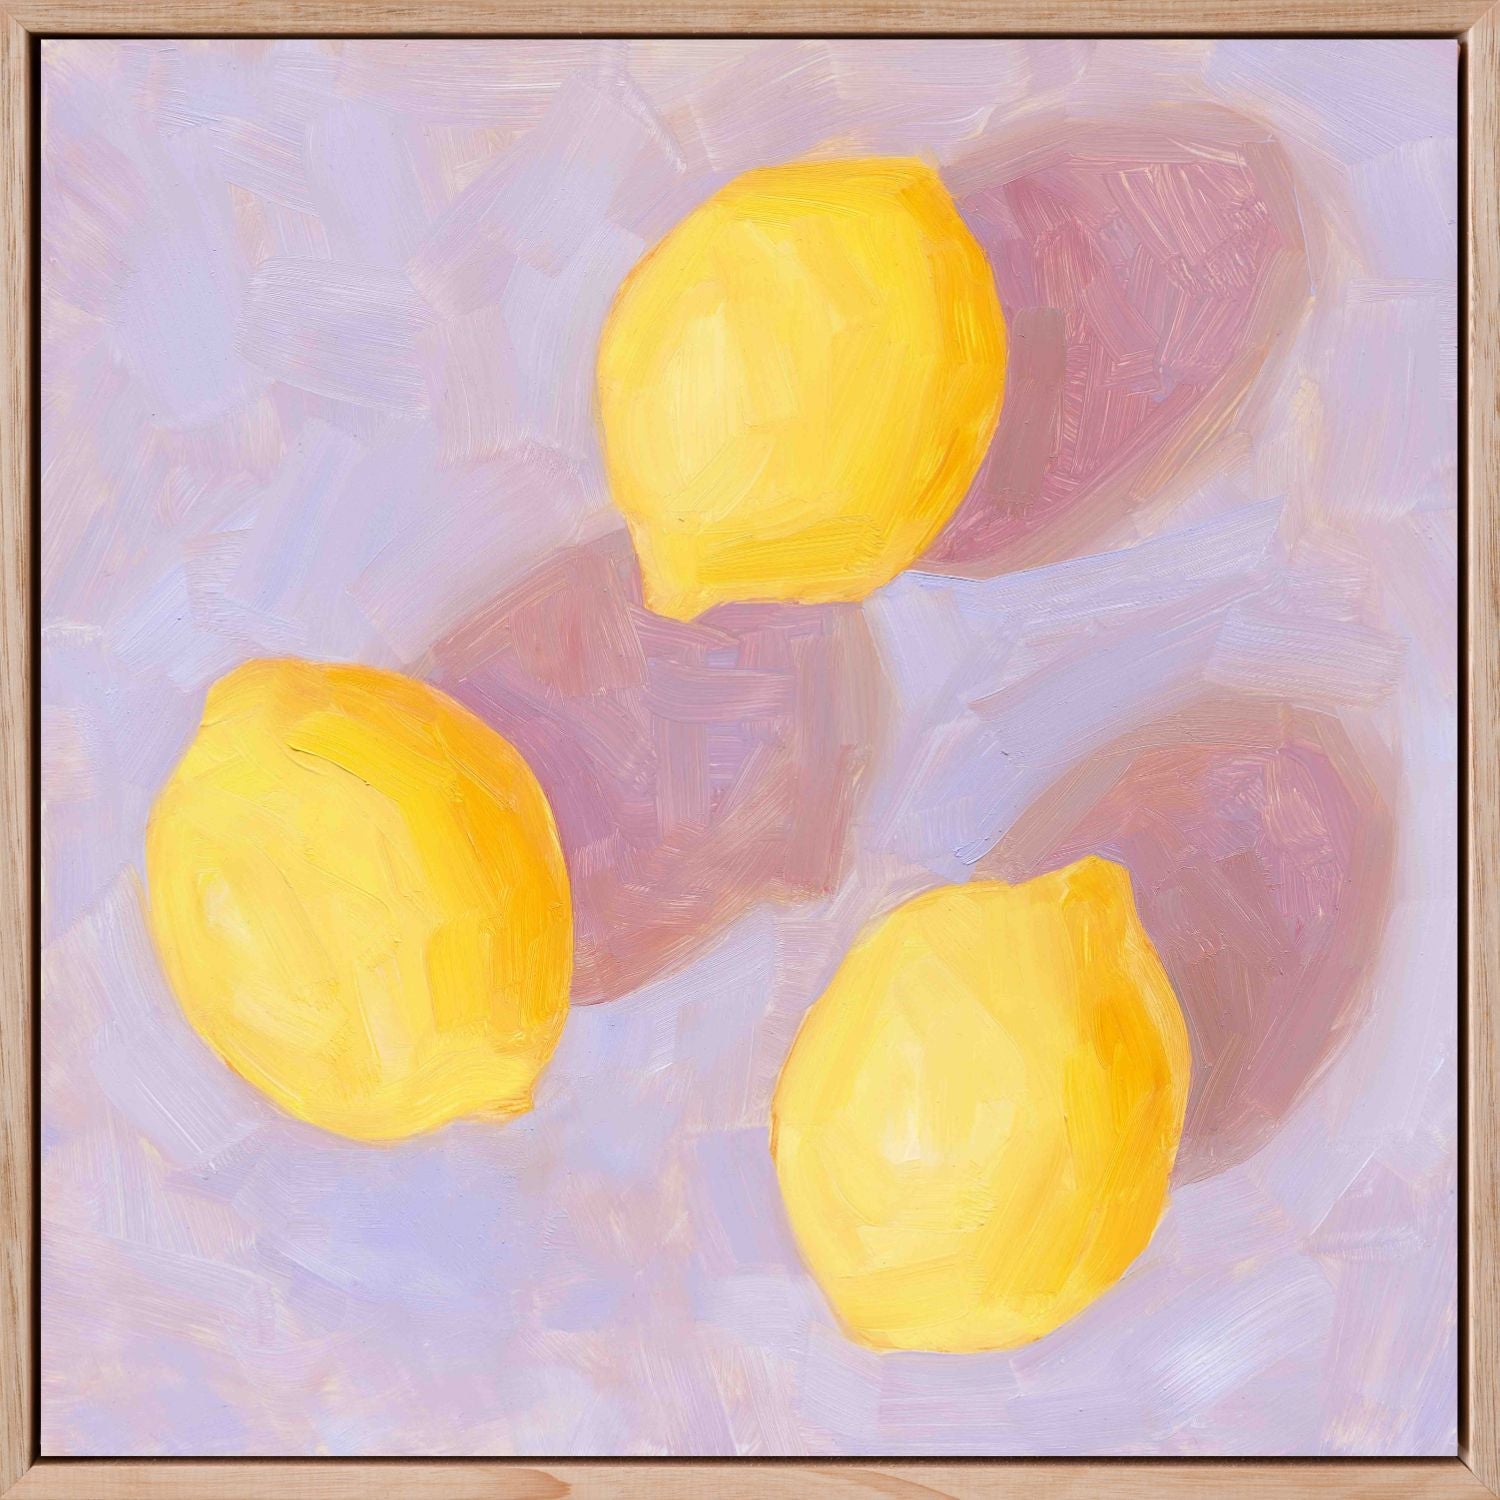 fine art framed canvas print of an original oil painting of three vibrant lemons with strong pink shadows on a textured lilac background